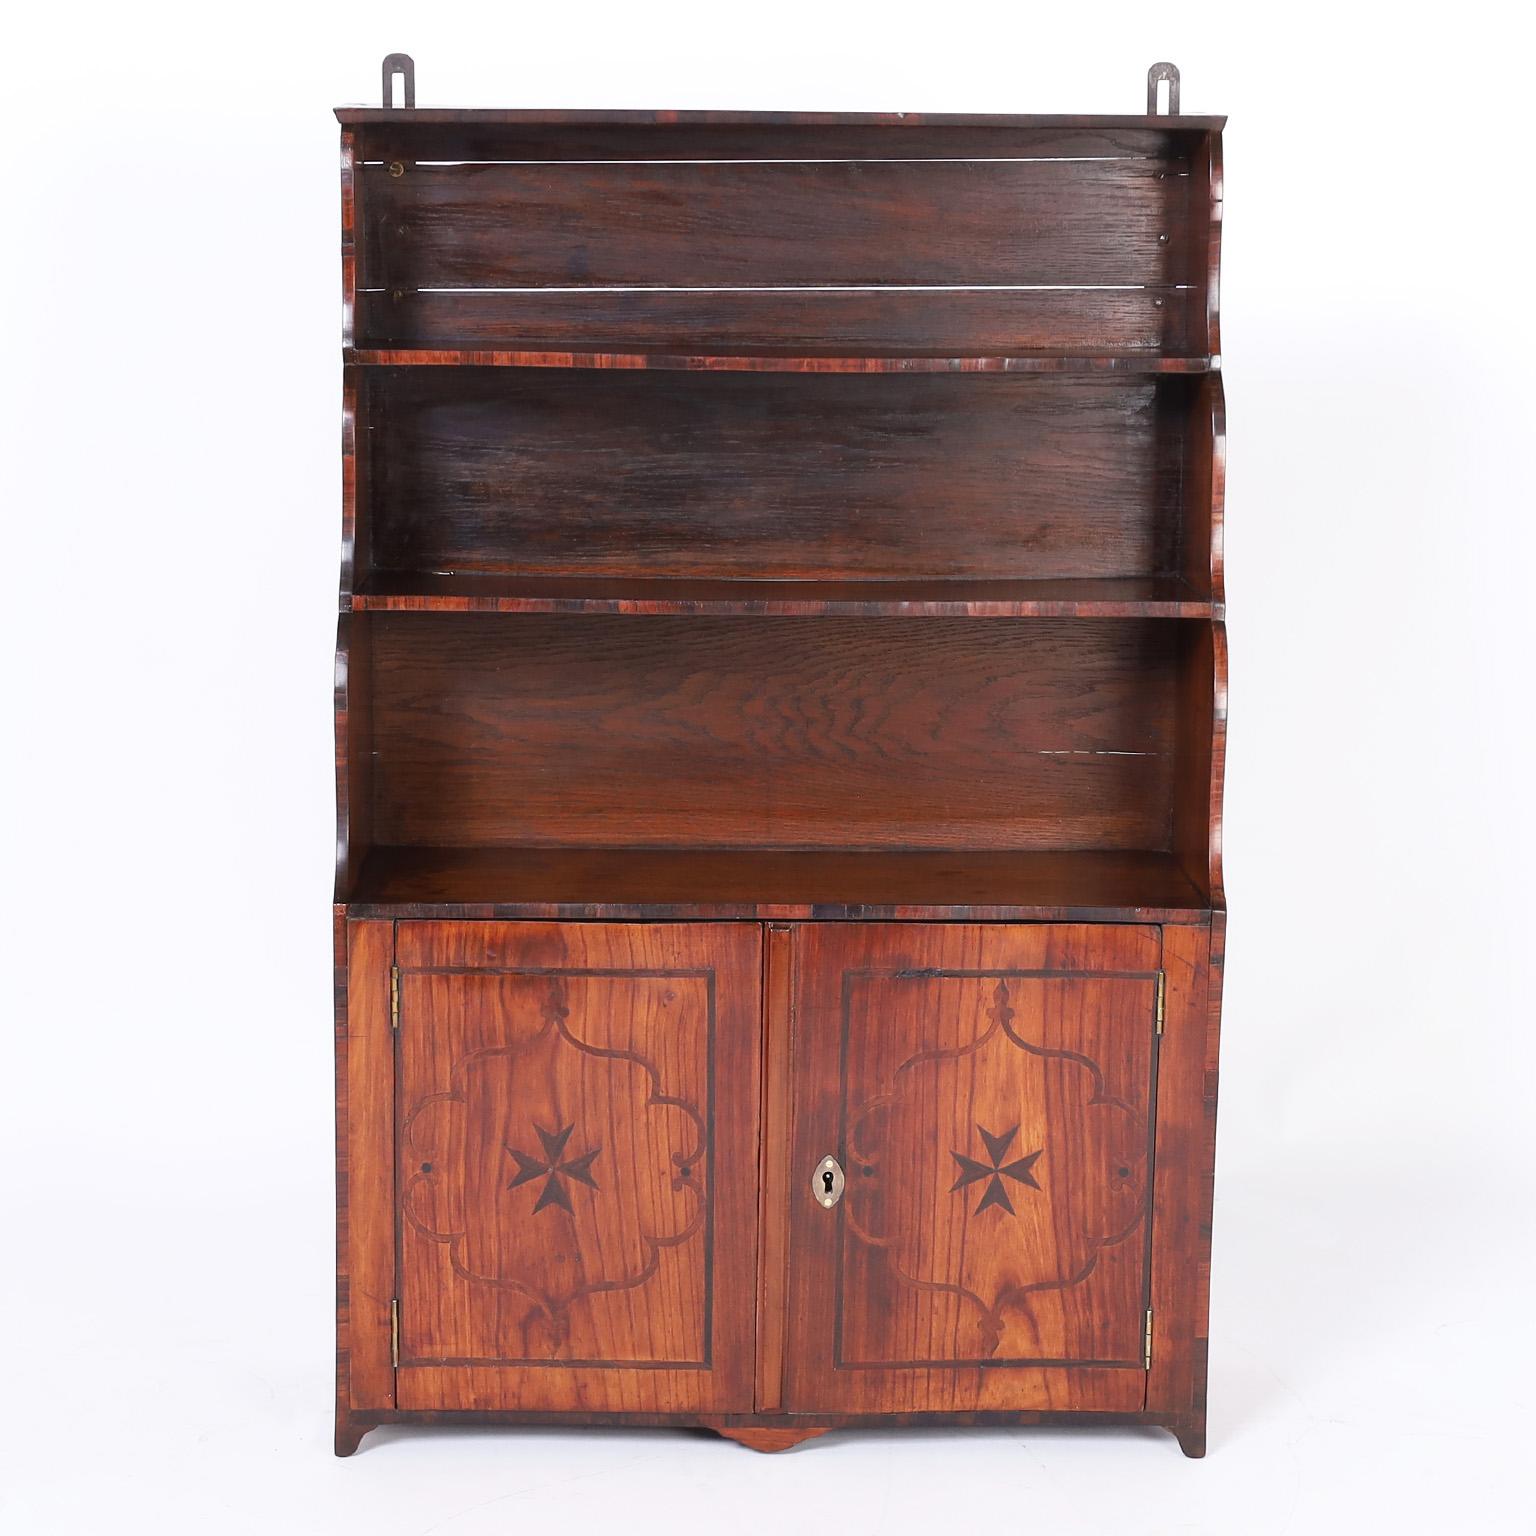 Rare and unusual 18th century petite cupboard crafted in well grained fruitwood in a step down form with a cabinet below, having rosewood inlays that accentuate the graceful lines, set on tapered feet and can be hung by metal brackets.